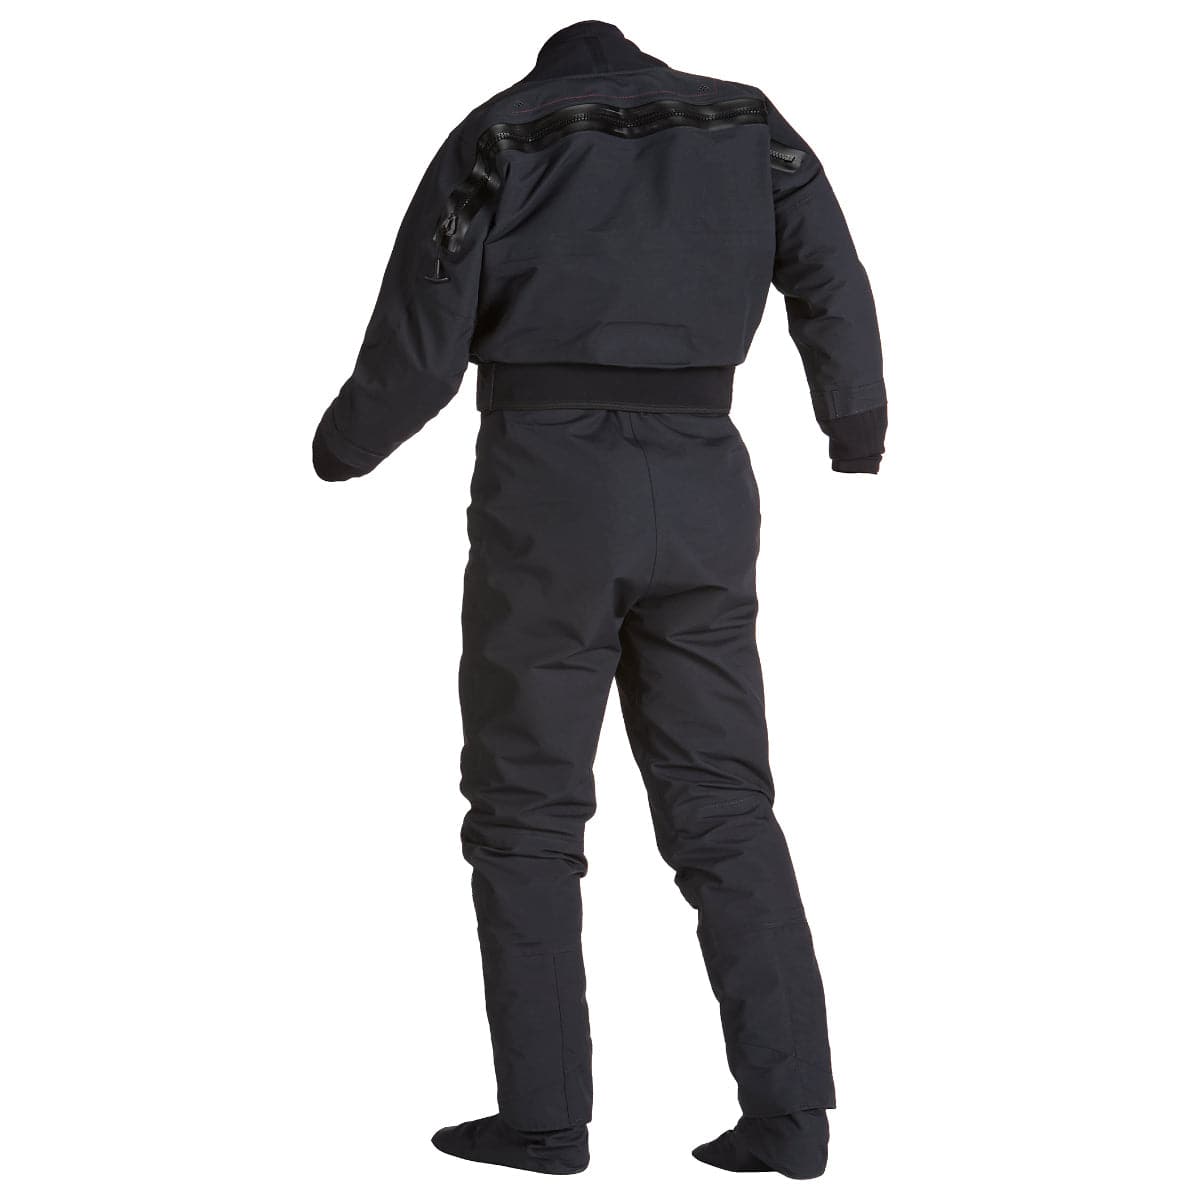 Featuring the Devils Club Drysuit men's dry wear manufactured by Immersion Research shown here from a second angle.